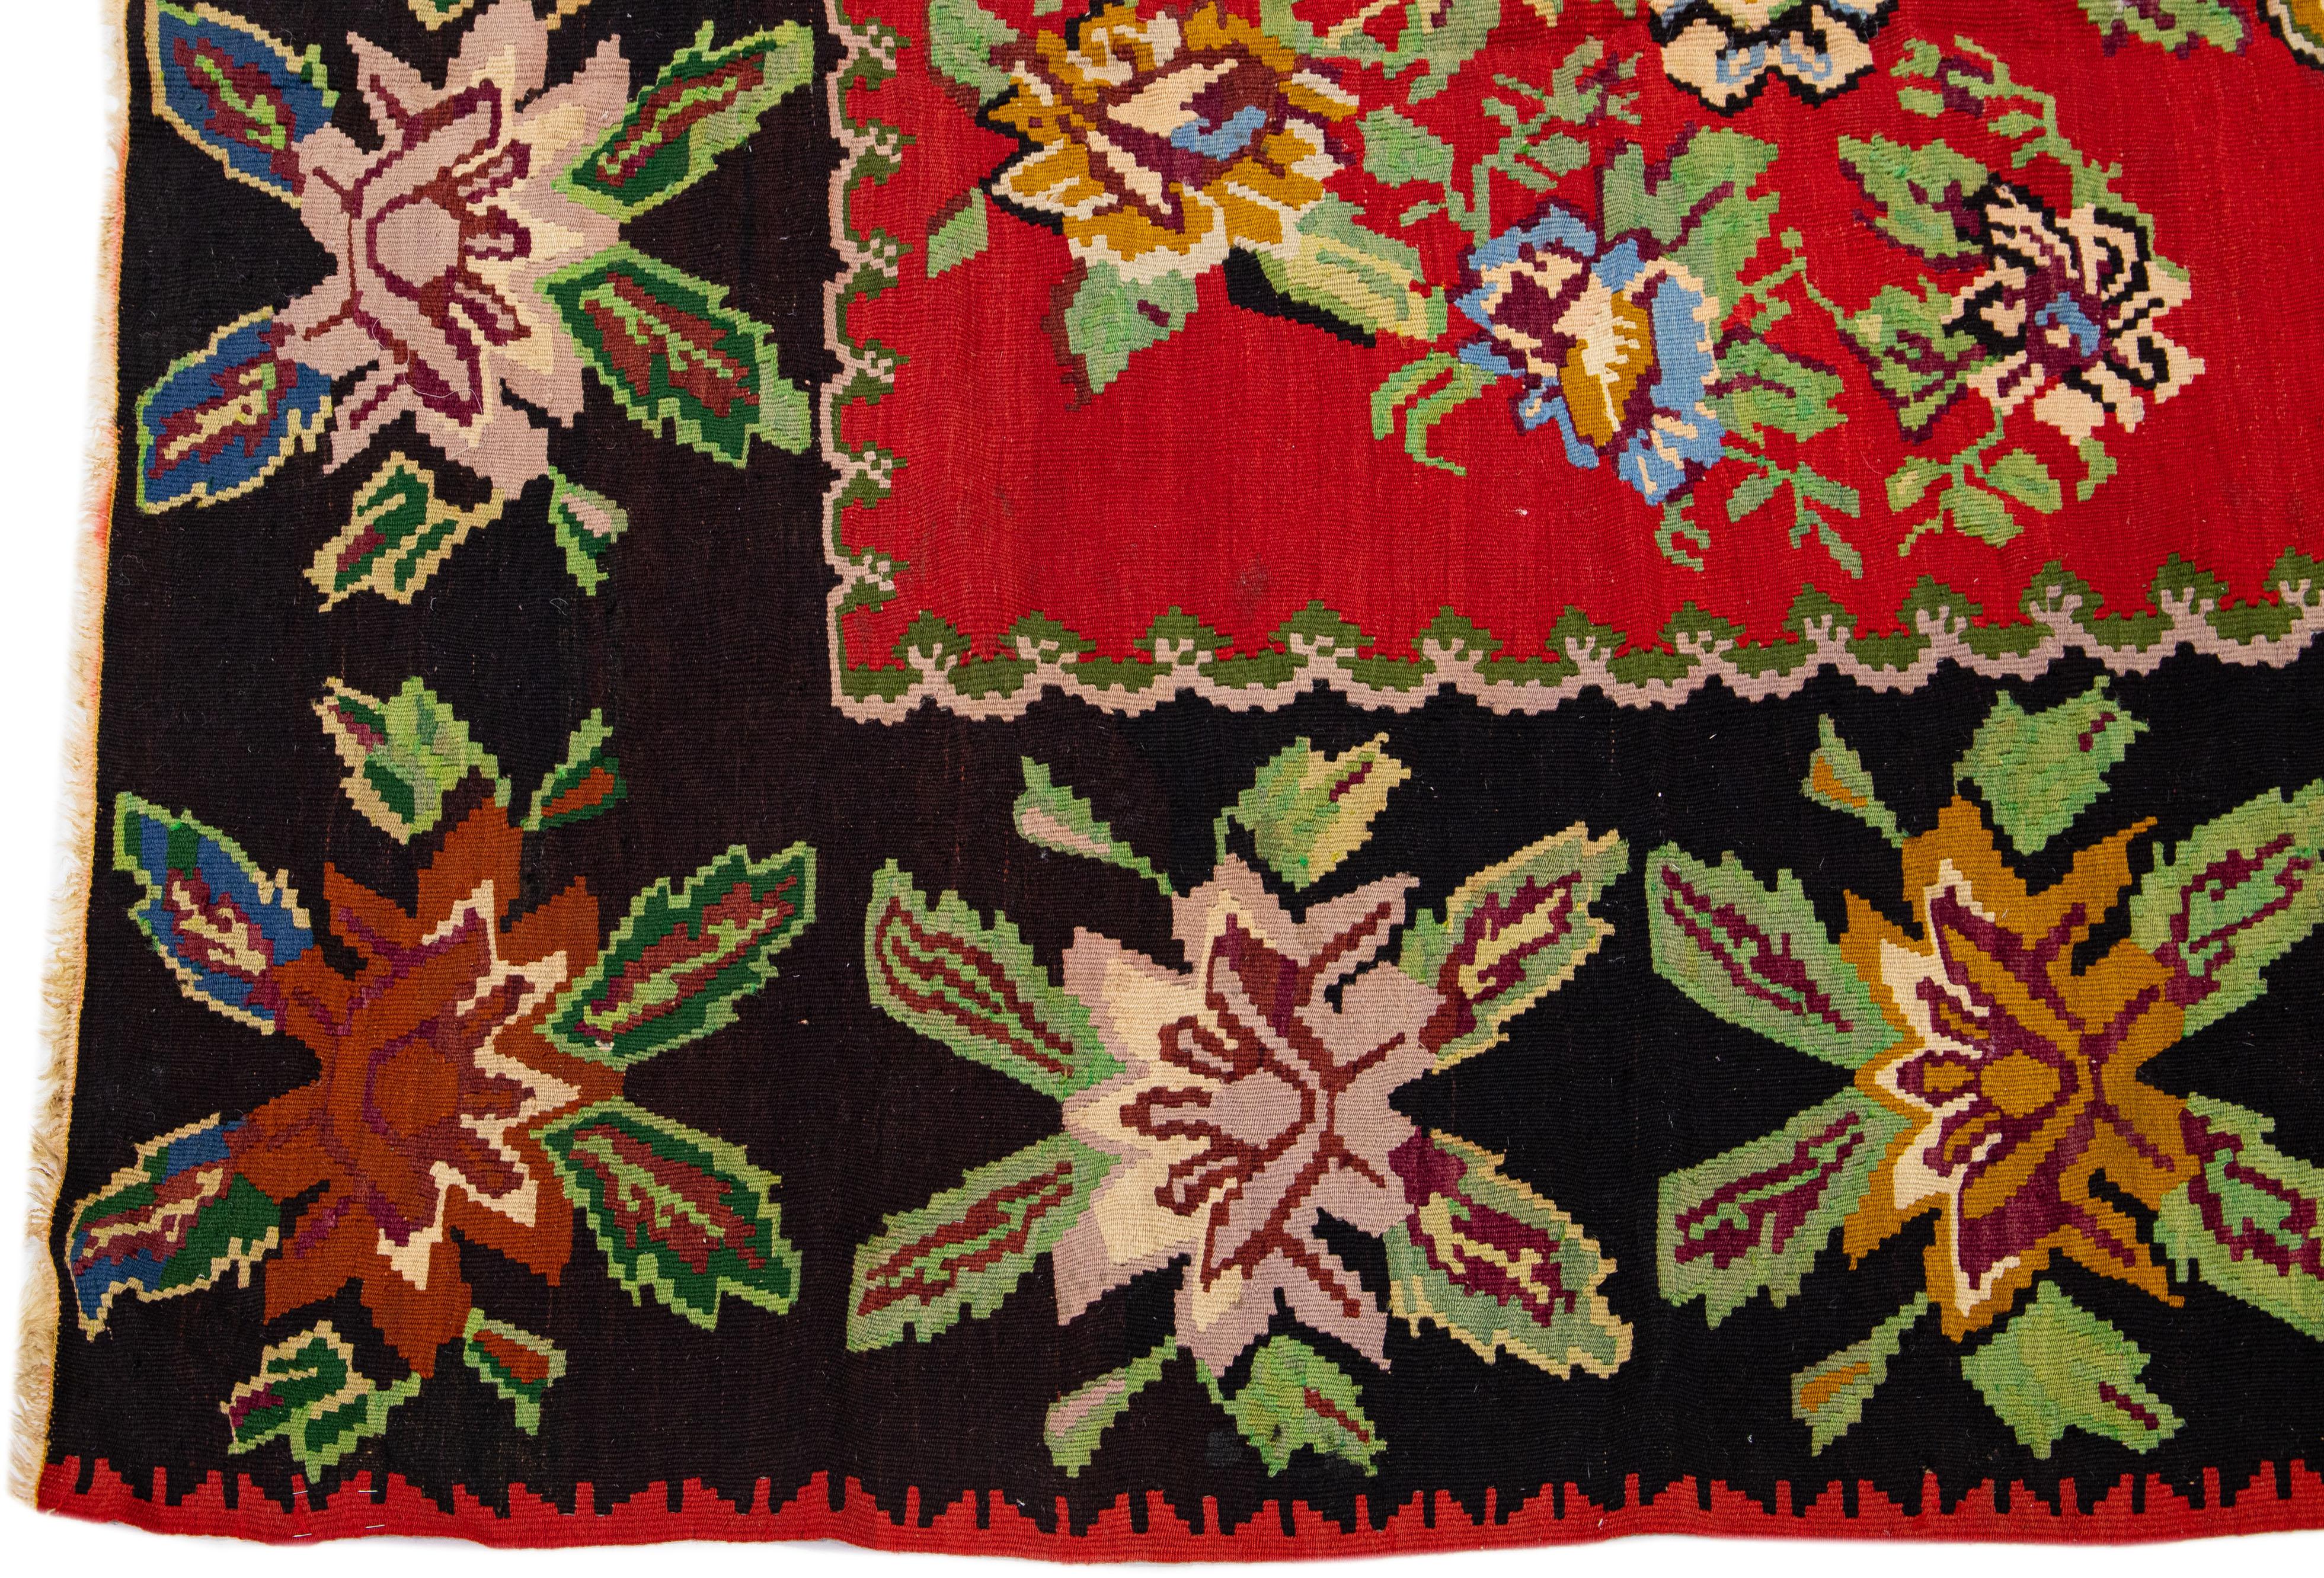 Vintage Red Bessarabian Style Kilim Wool Rug with Allover Floral Motif In Excellent Condition For Sale In Norwalk, CT